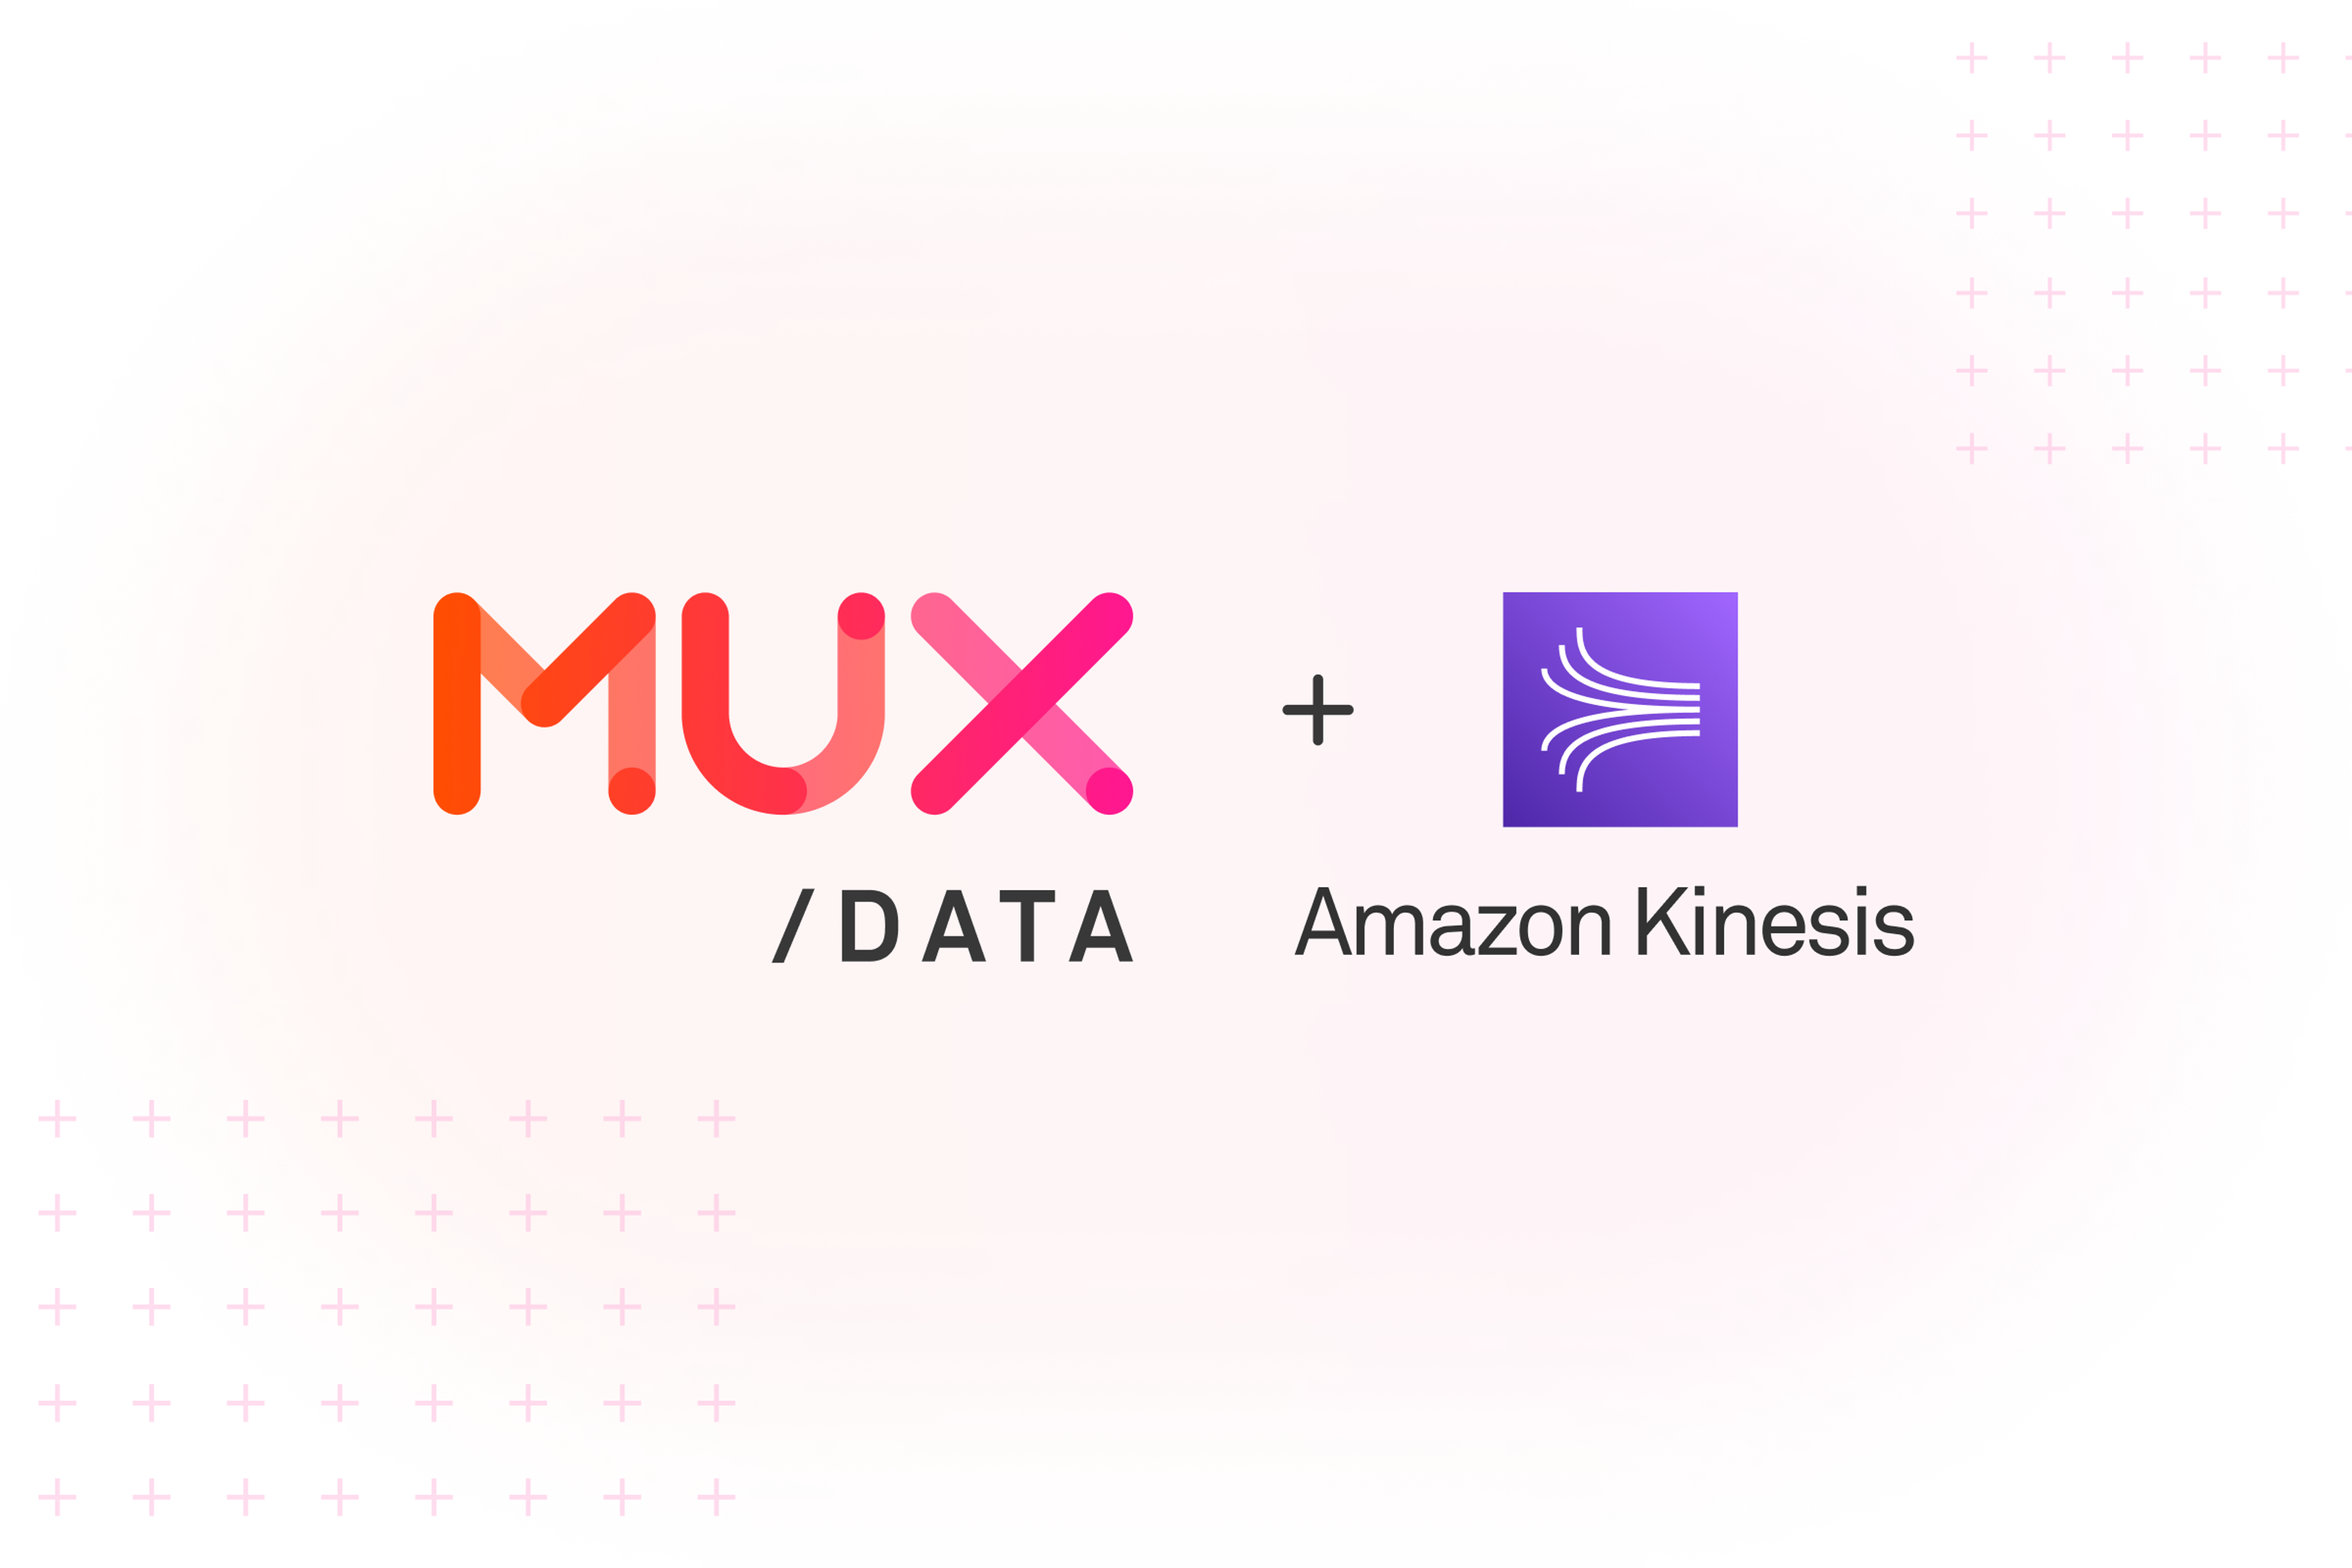 An image containing the Mux Data logo and the Amazon Kinesis logo